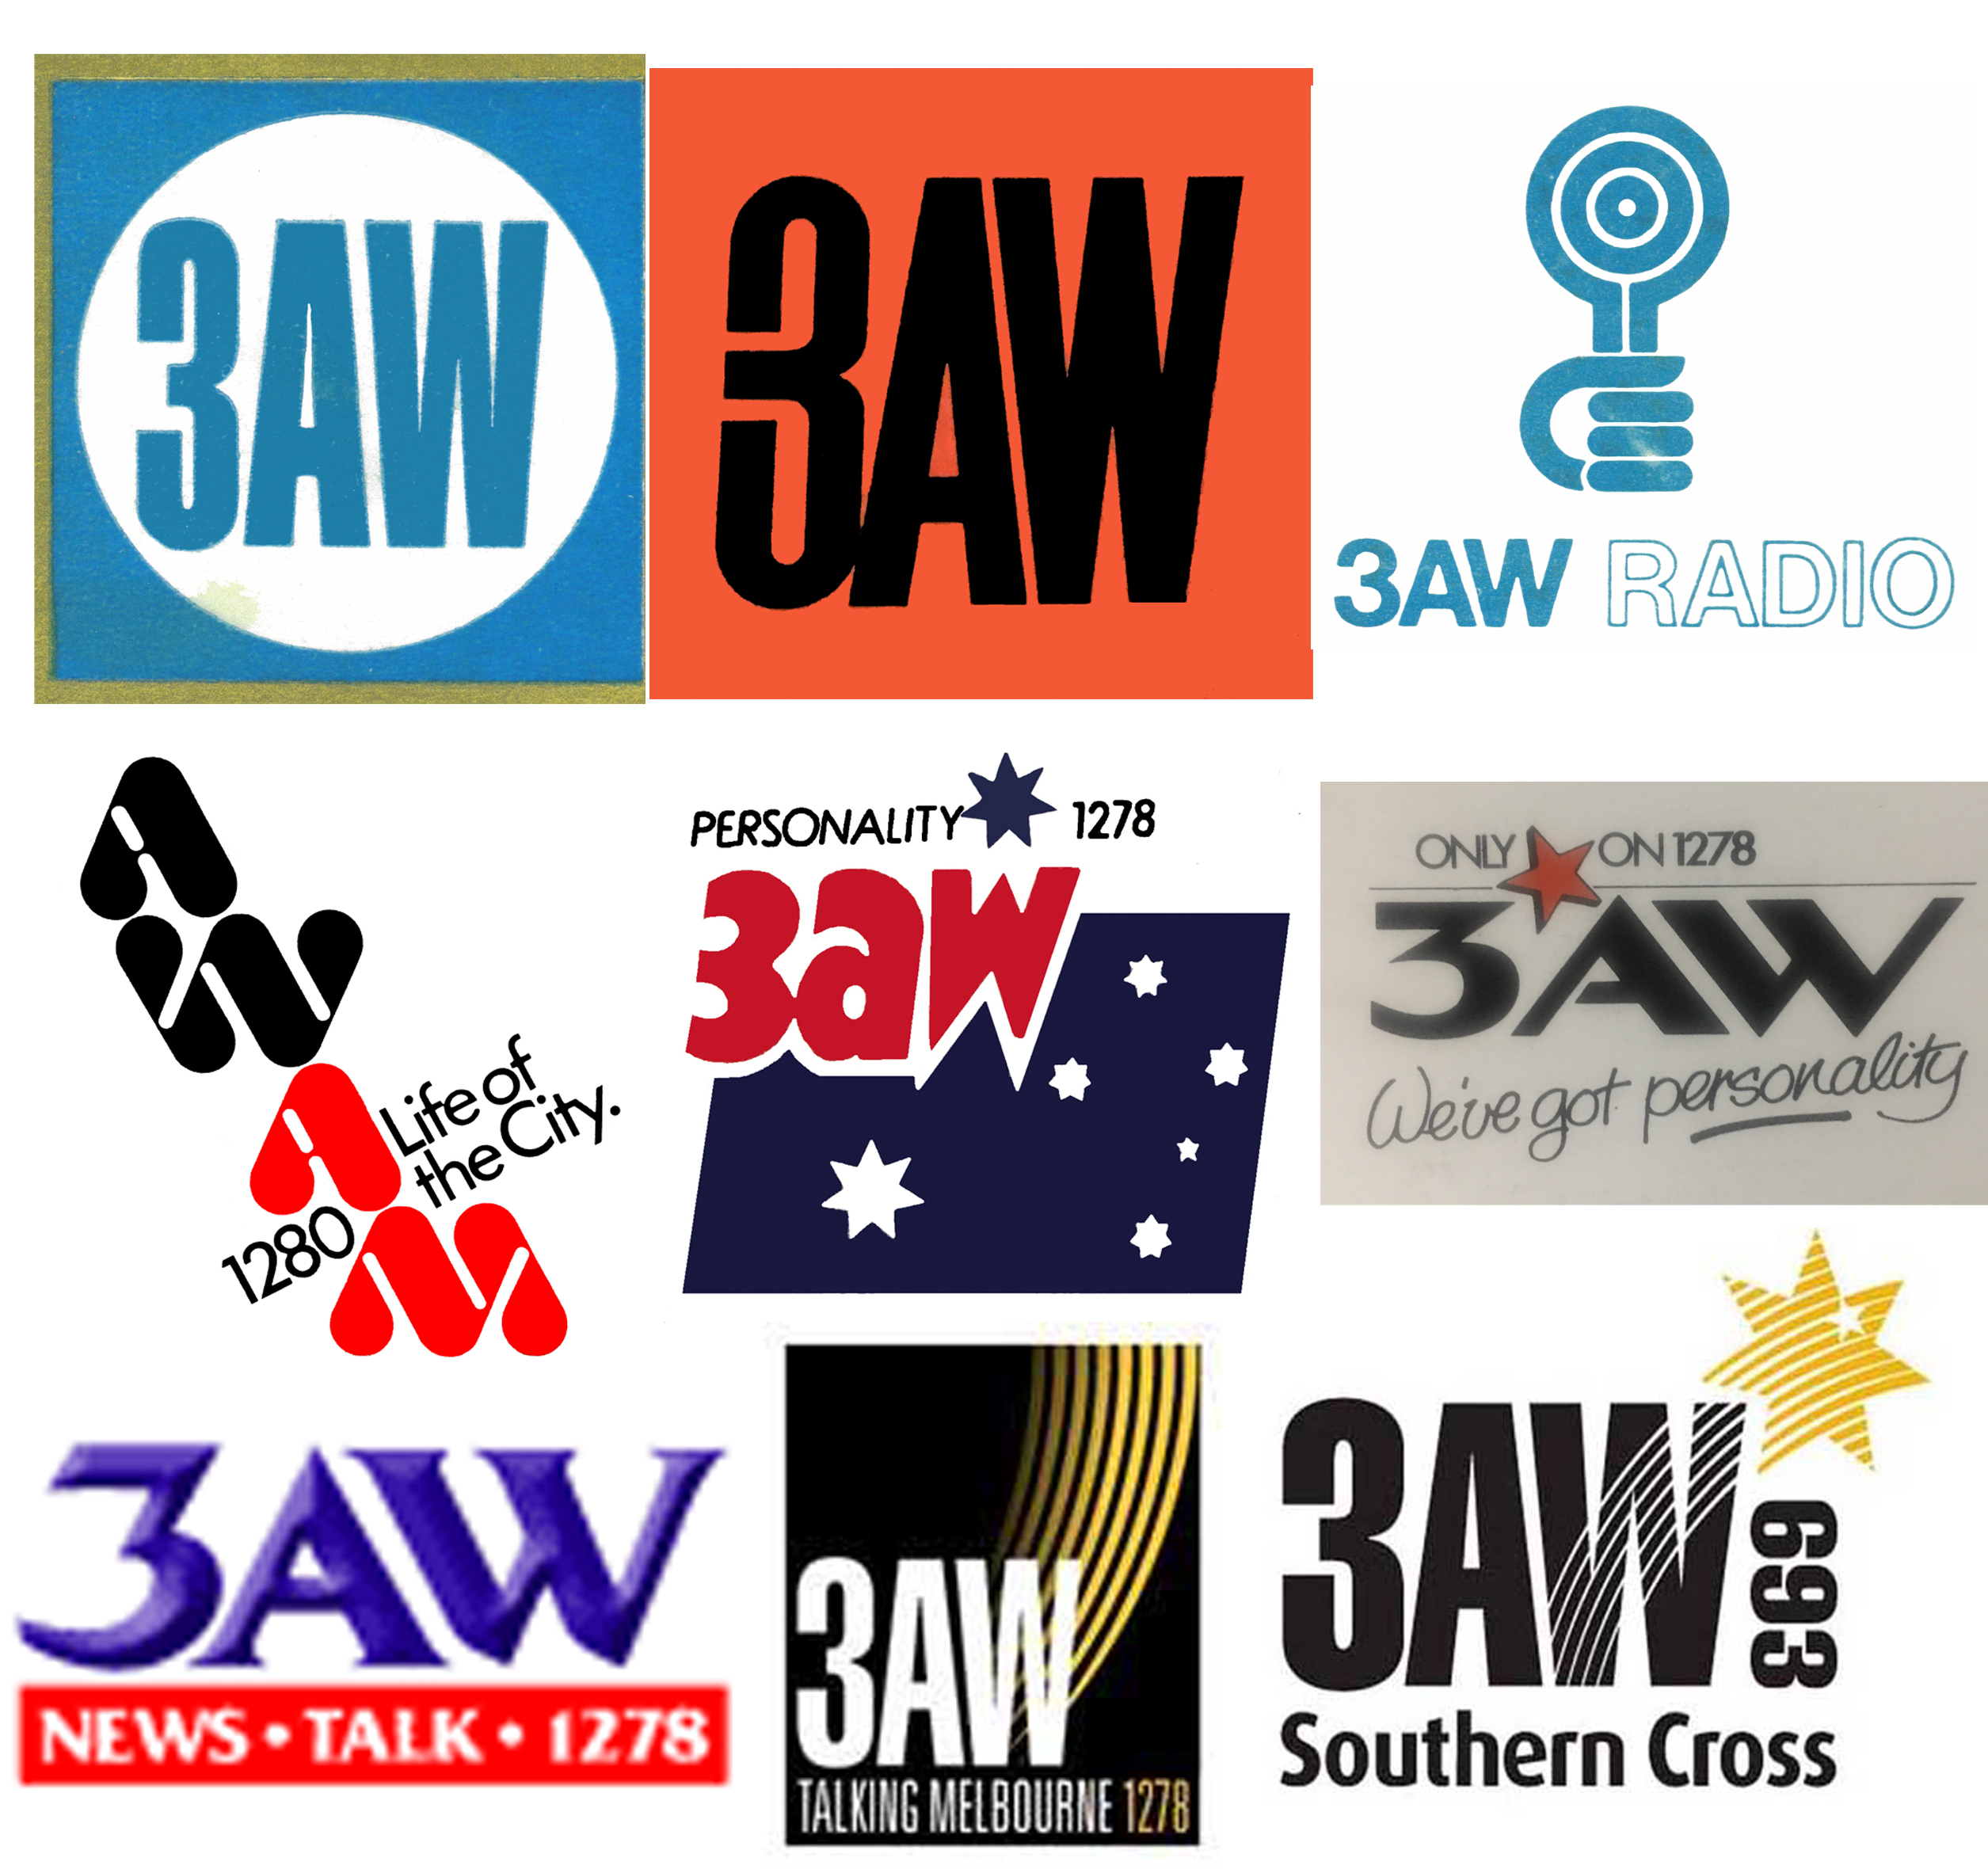 The 3AW Archive.